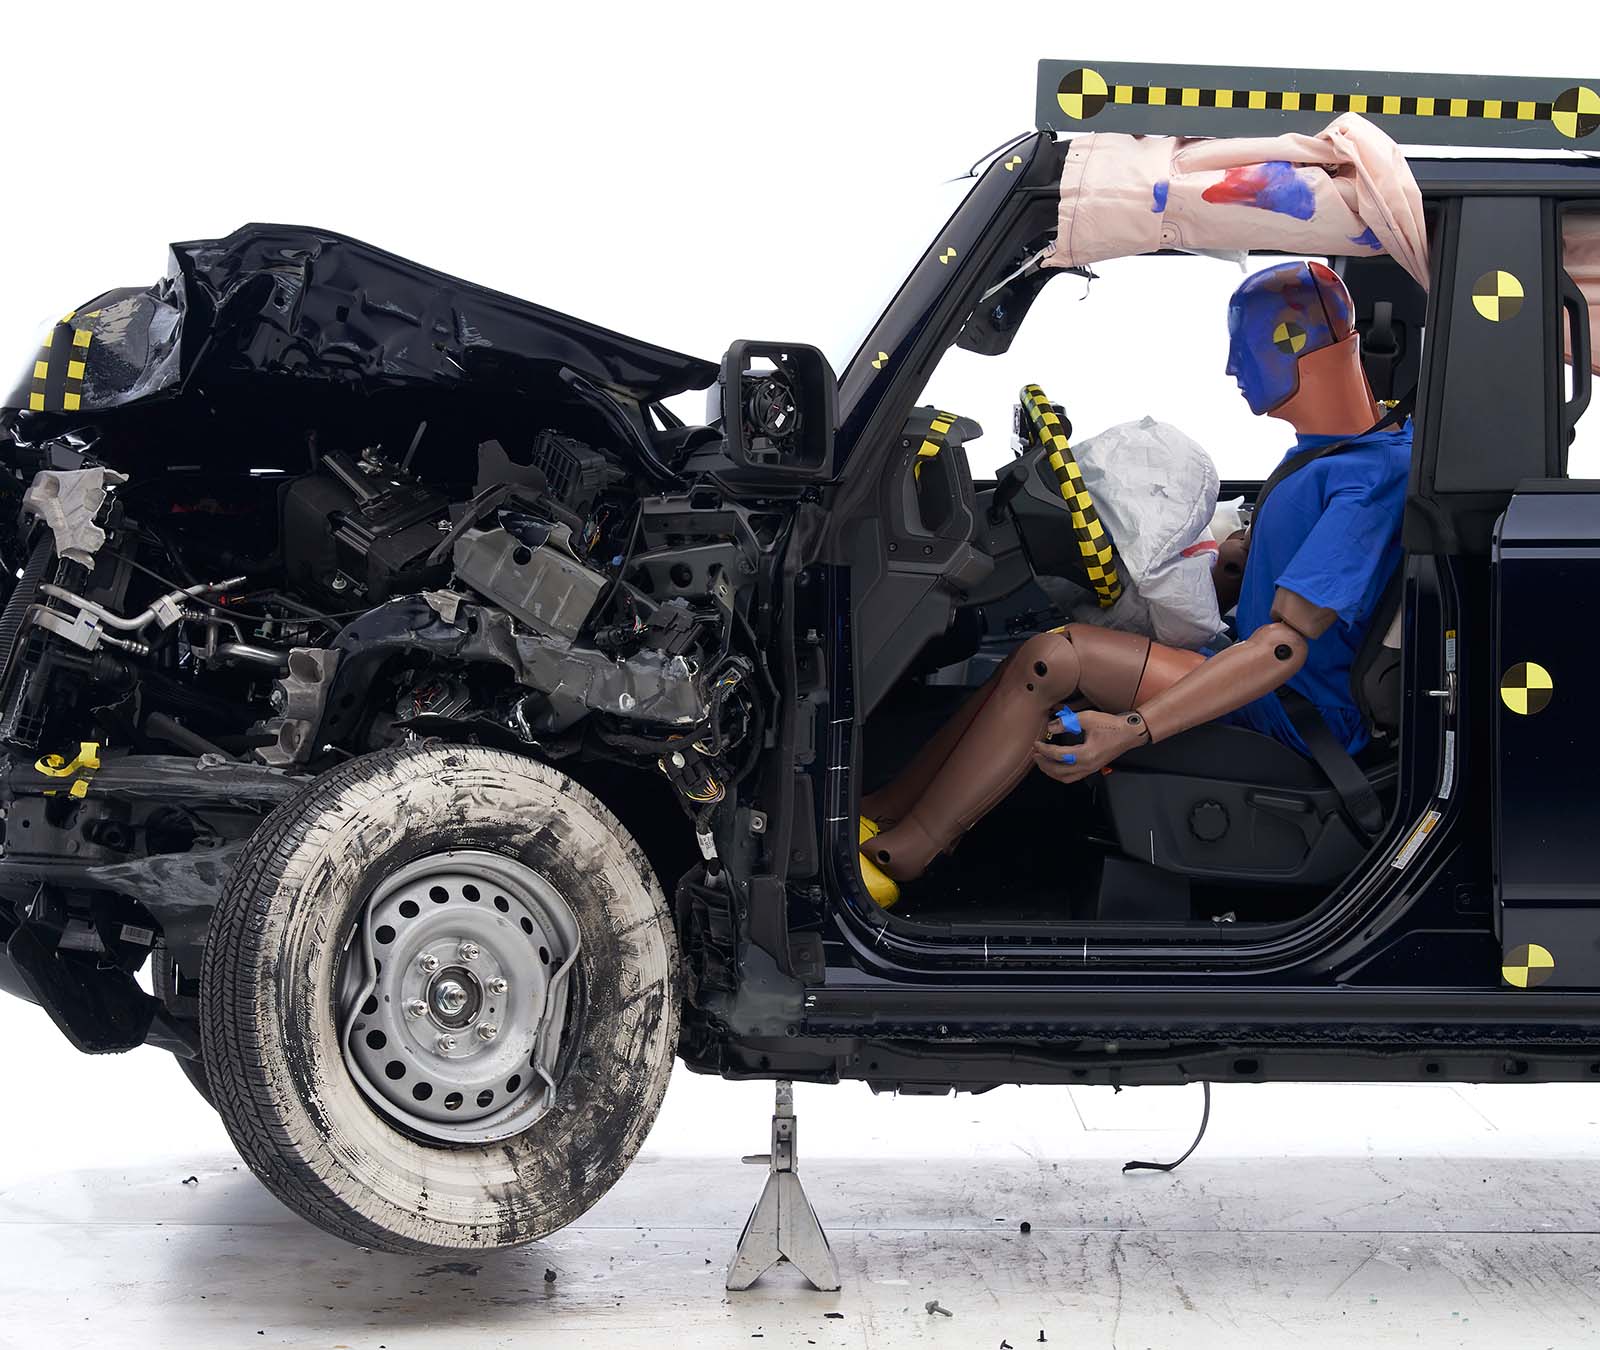 2021-ford-bronco-crash-test-reveals-acceptable-performance-for-head-restraints-and-seats_8.jpg